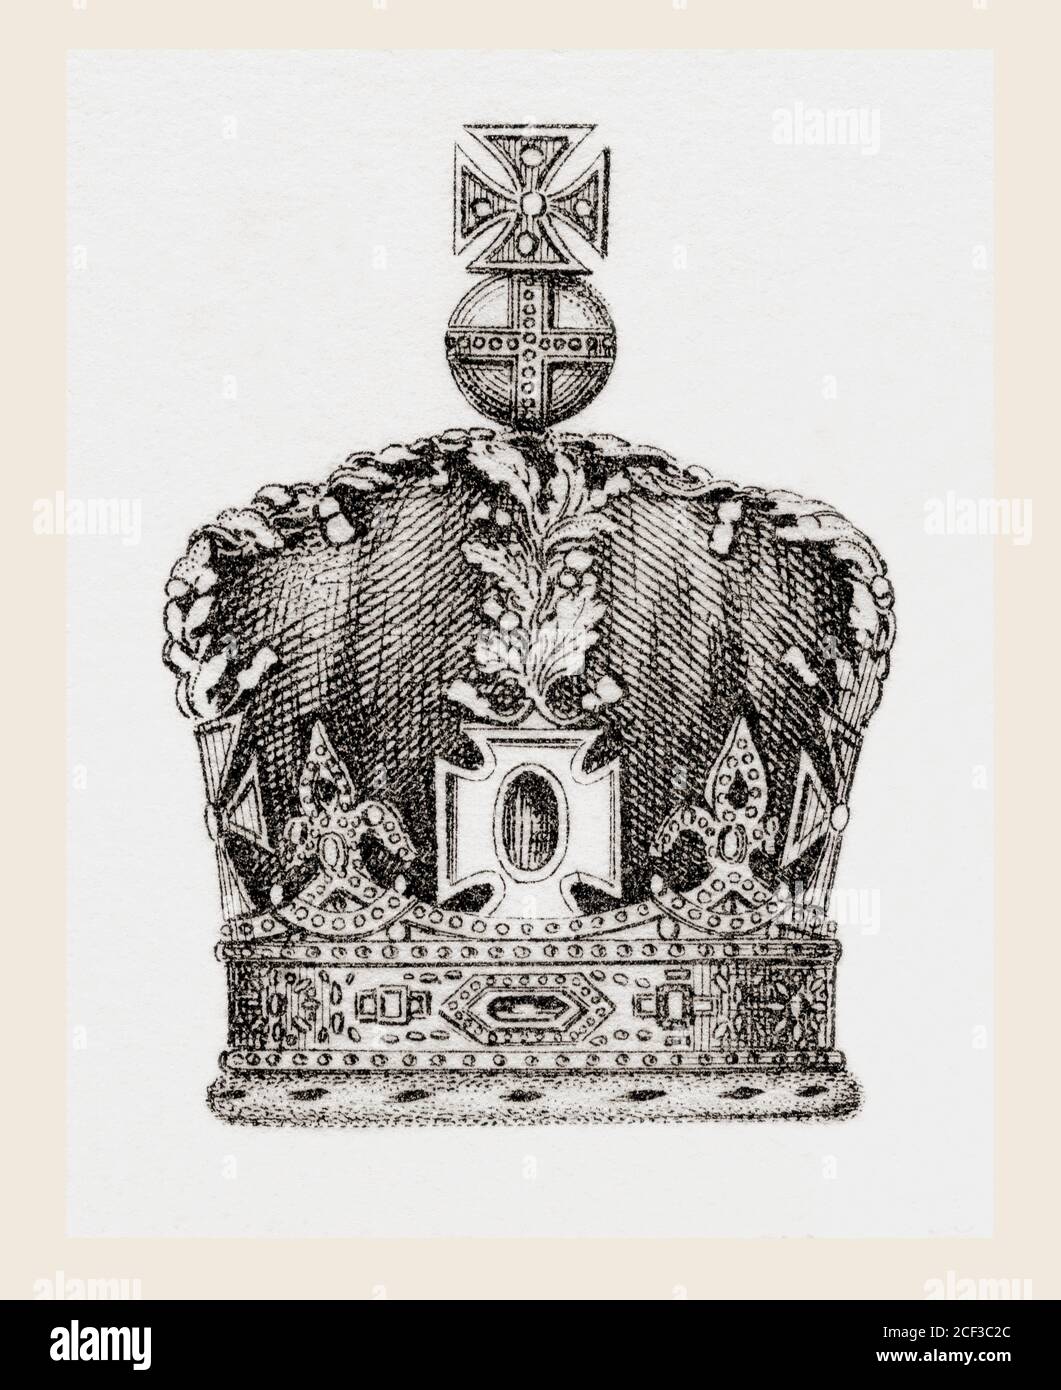 The Imperial State Crown, made for Queen Victoria in 1838.  From The National Encyclopaedia: A Dictionary of Universal Knowledge, published c.1890 Stock Photo